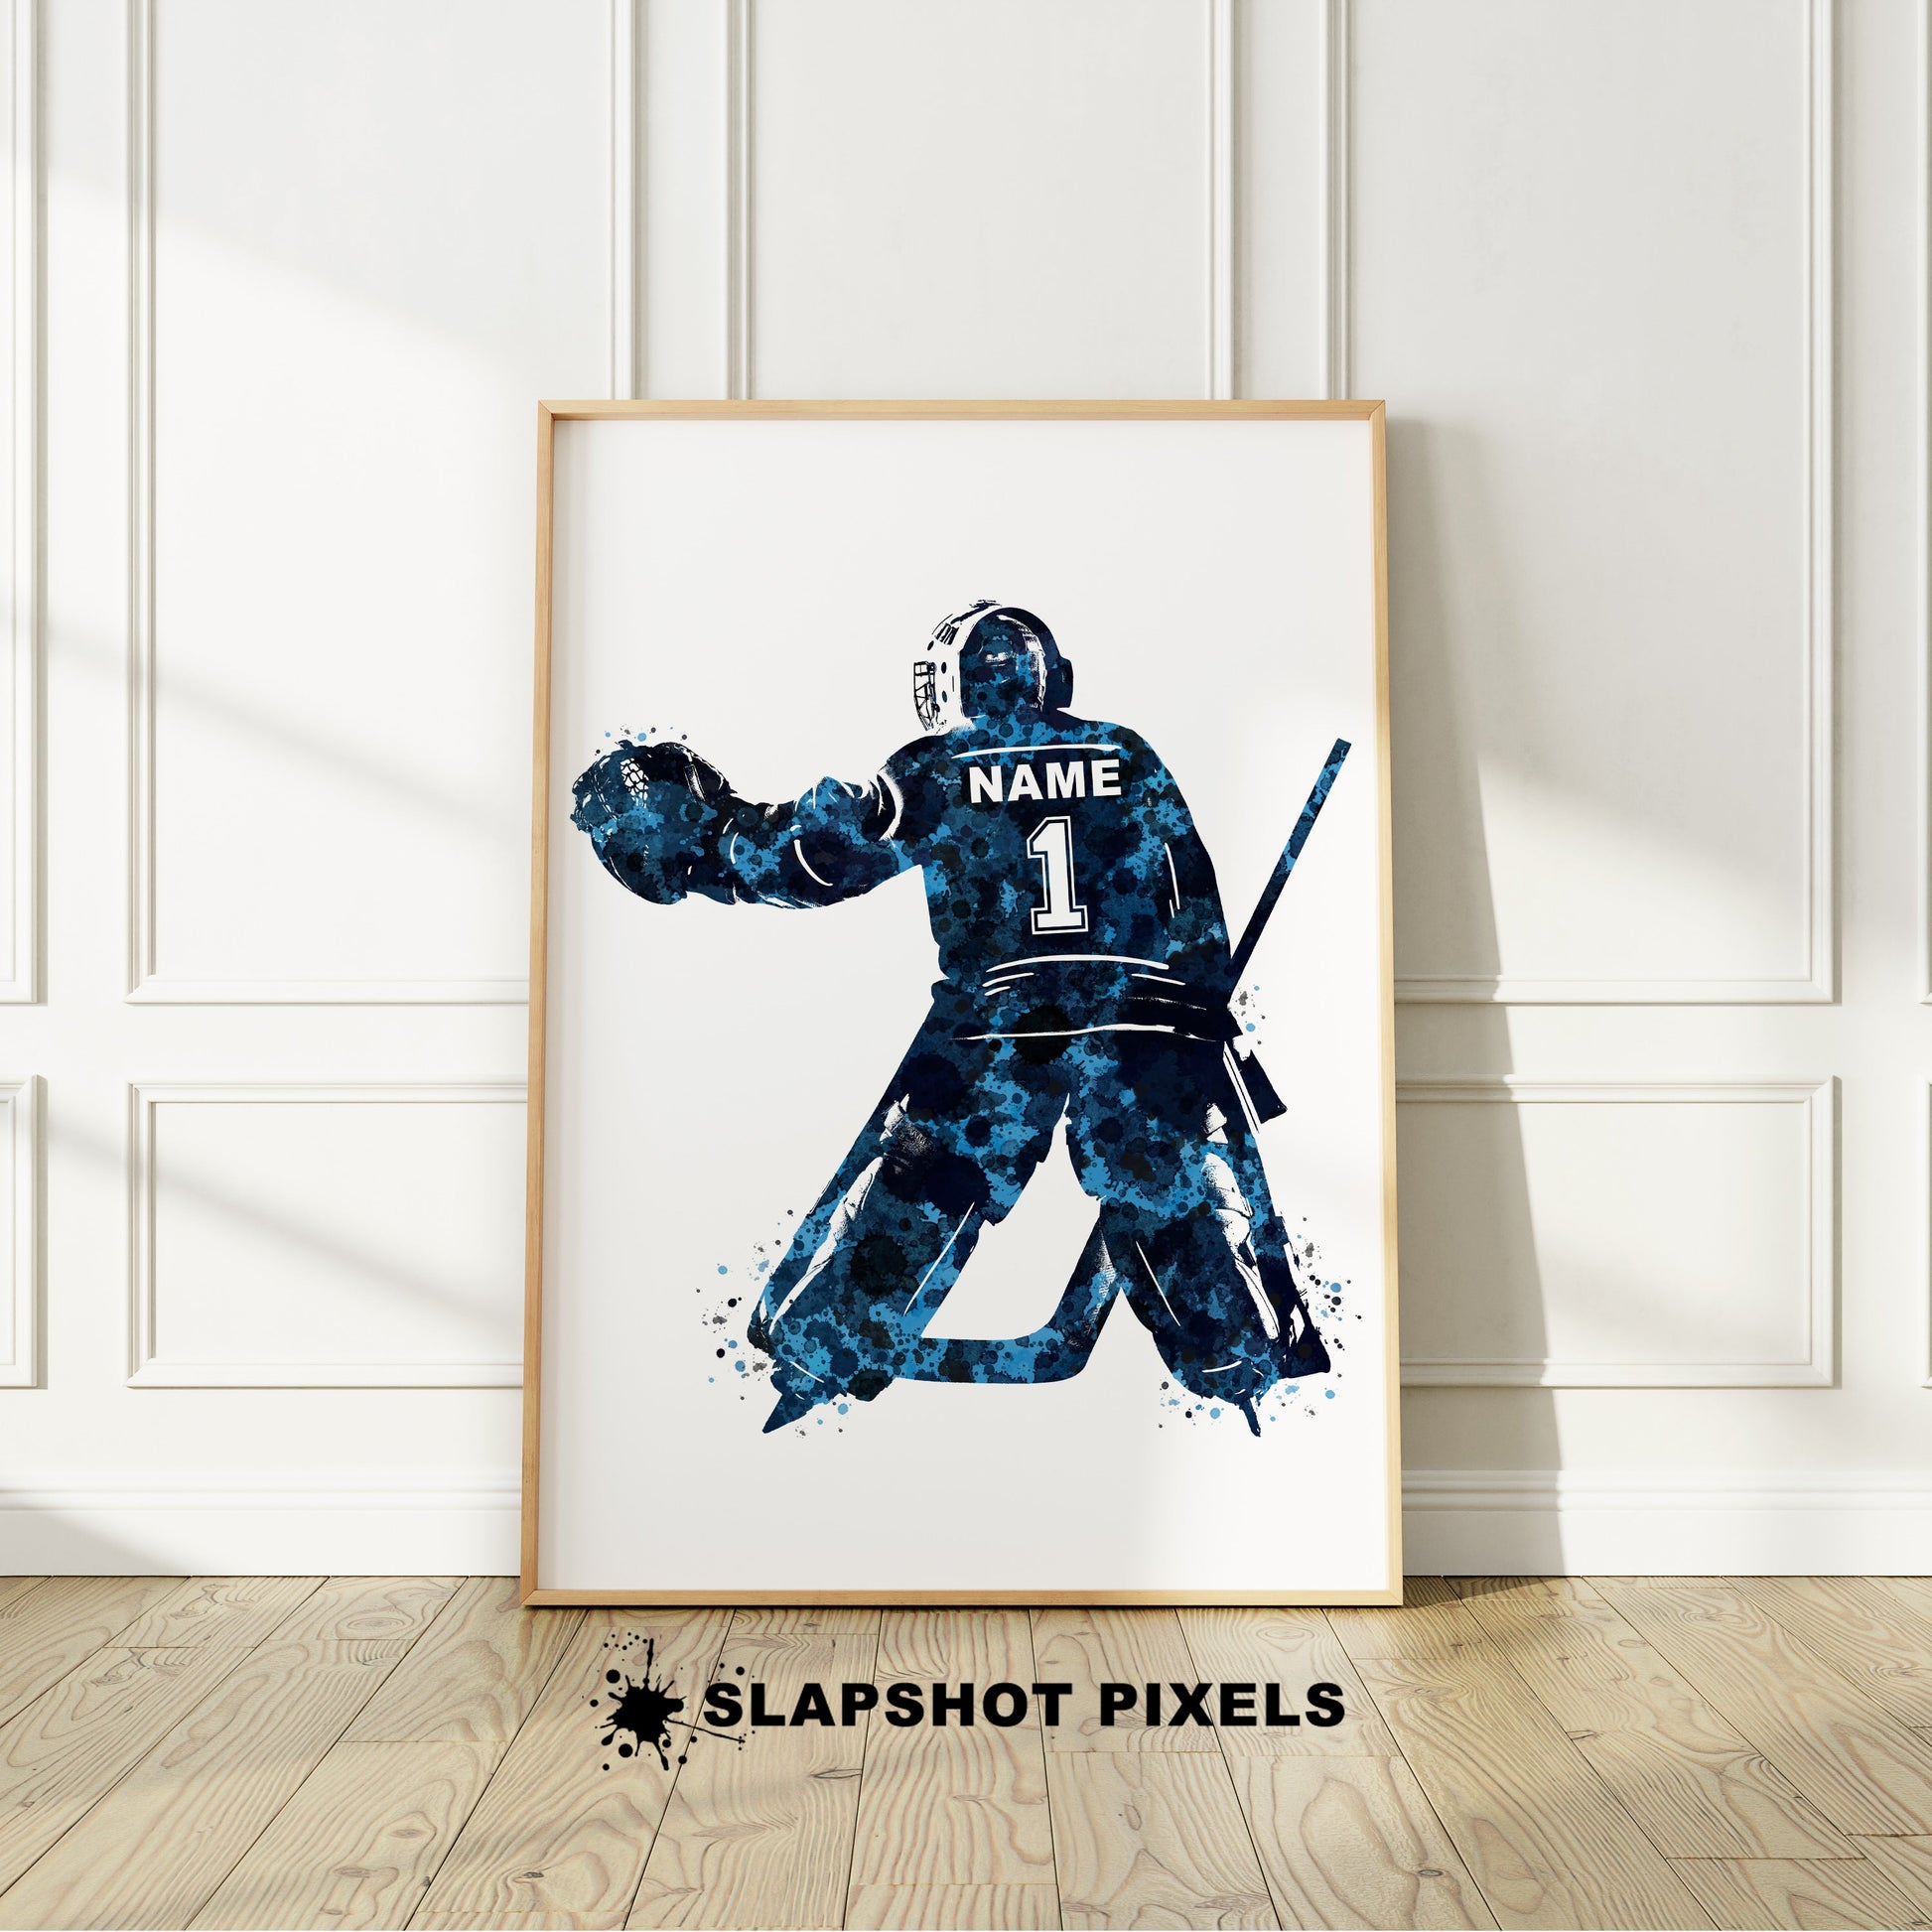 Personalized goalie hockey poster showing back of a goalie hockey player with custom name and number on the hockey jersey. Designed in watercolor splatters. Choose your preferred color. Perfect hockey gifts for boys, hockey team gifts, hockey coach gift, hockey wall art décor in a hockey bedroom and birthday gifts for hockey players.